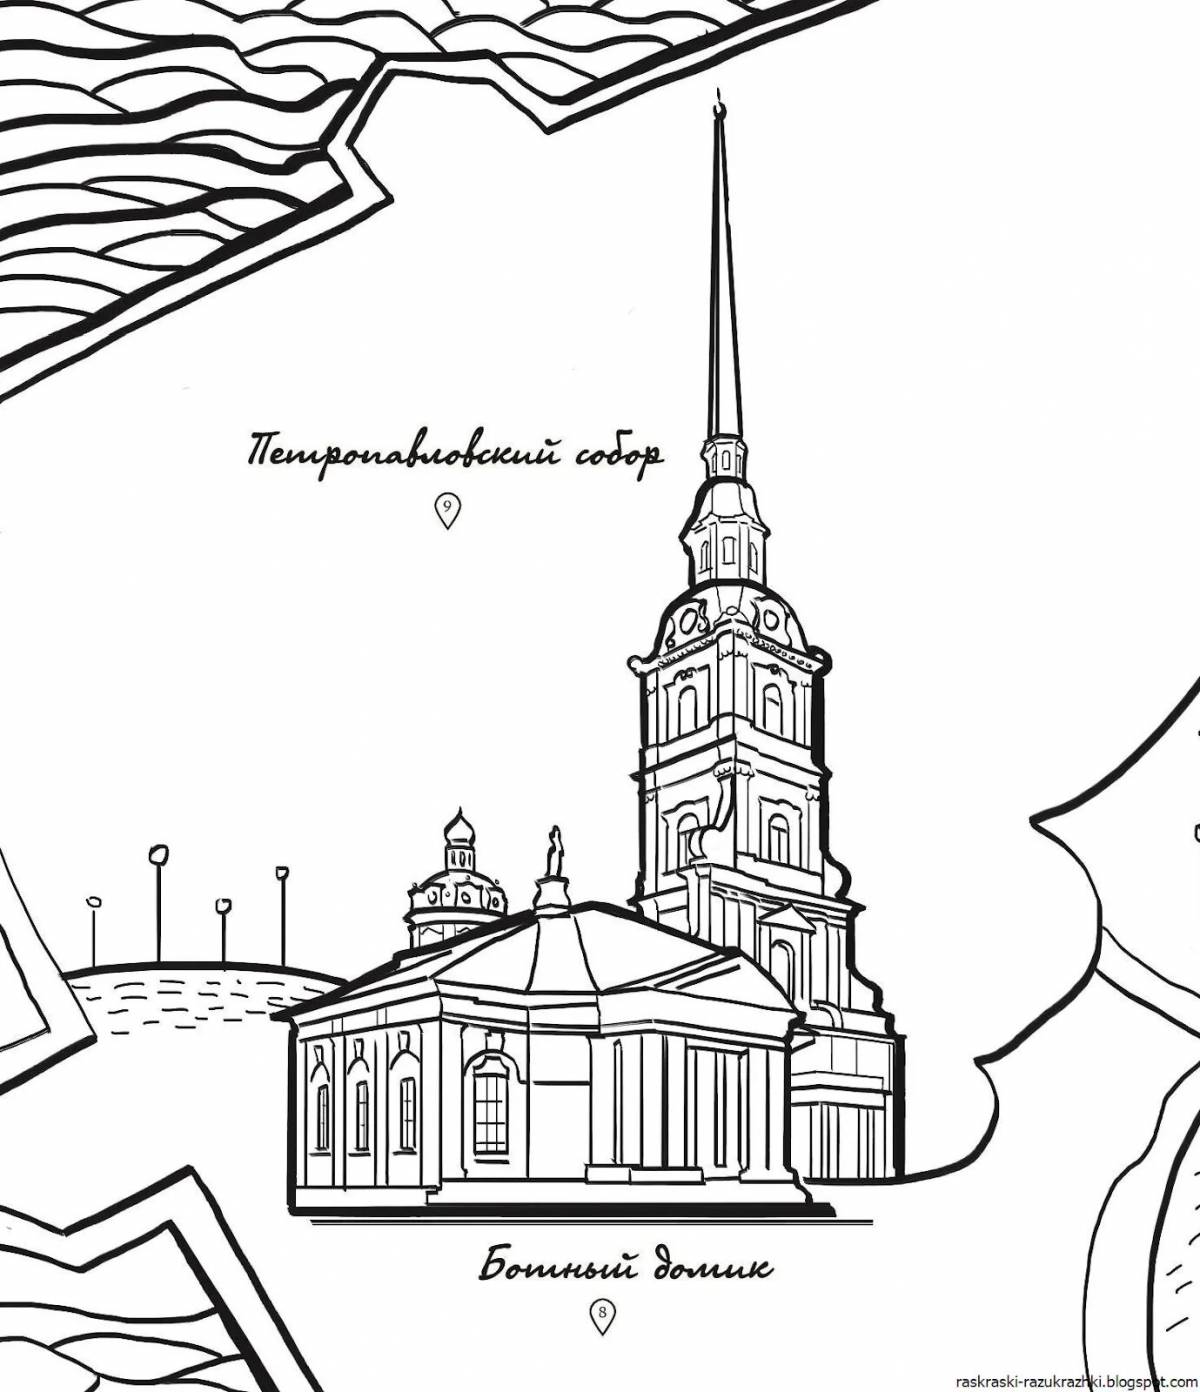 Color-frenzy st petersburg coloring page for children 5-6 years old